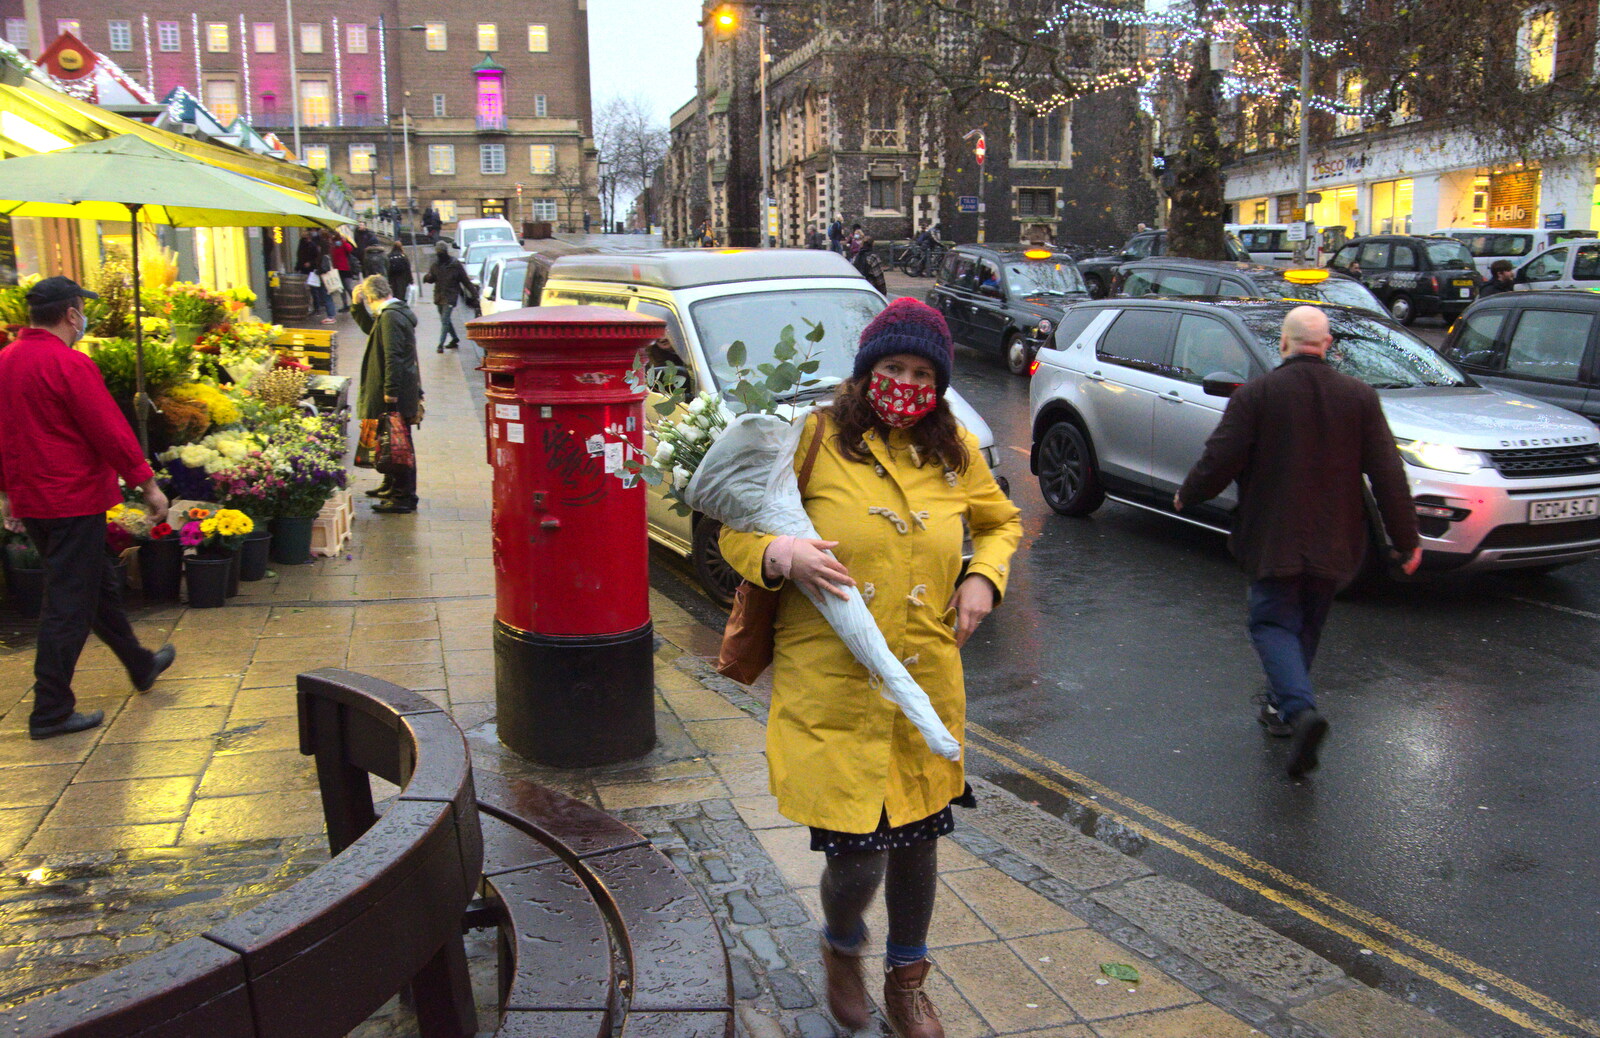 Isobel with a bunch of flowers from A Bit of Christmas Shopping, Norwich, Norfolk - 23rd December 2020